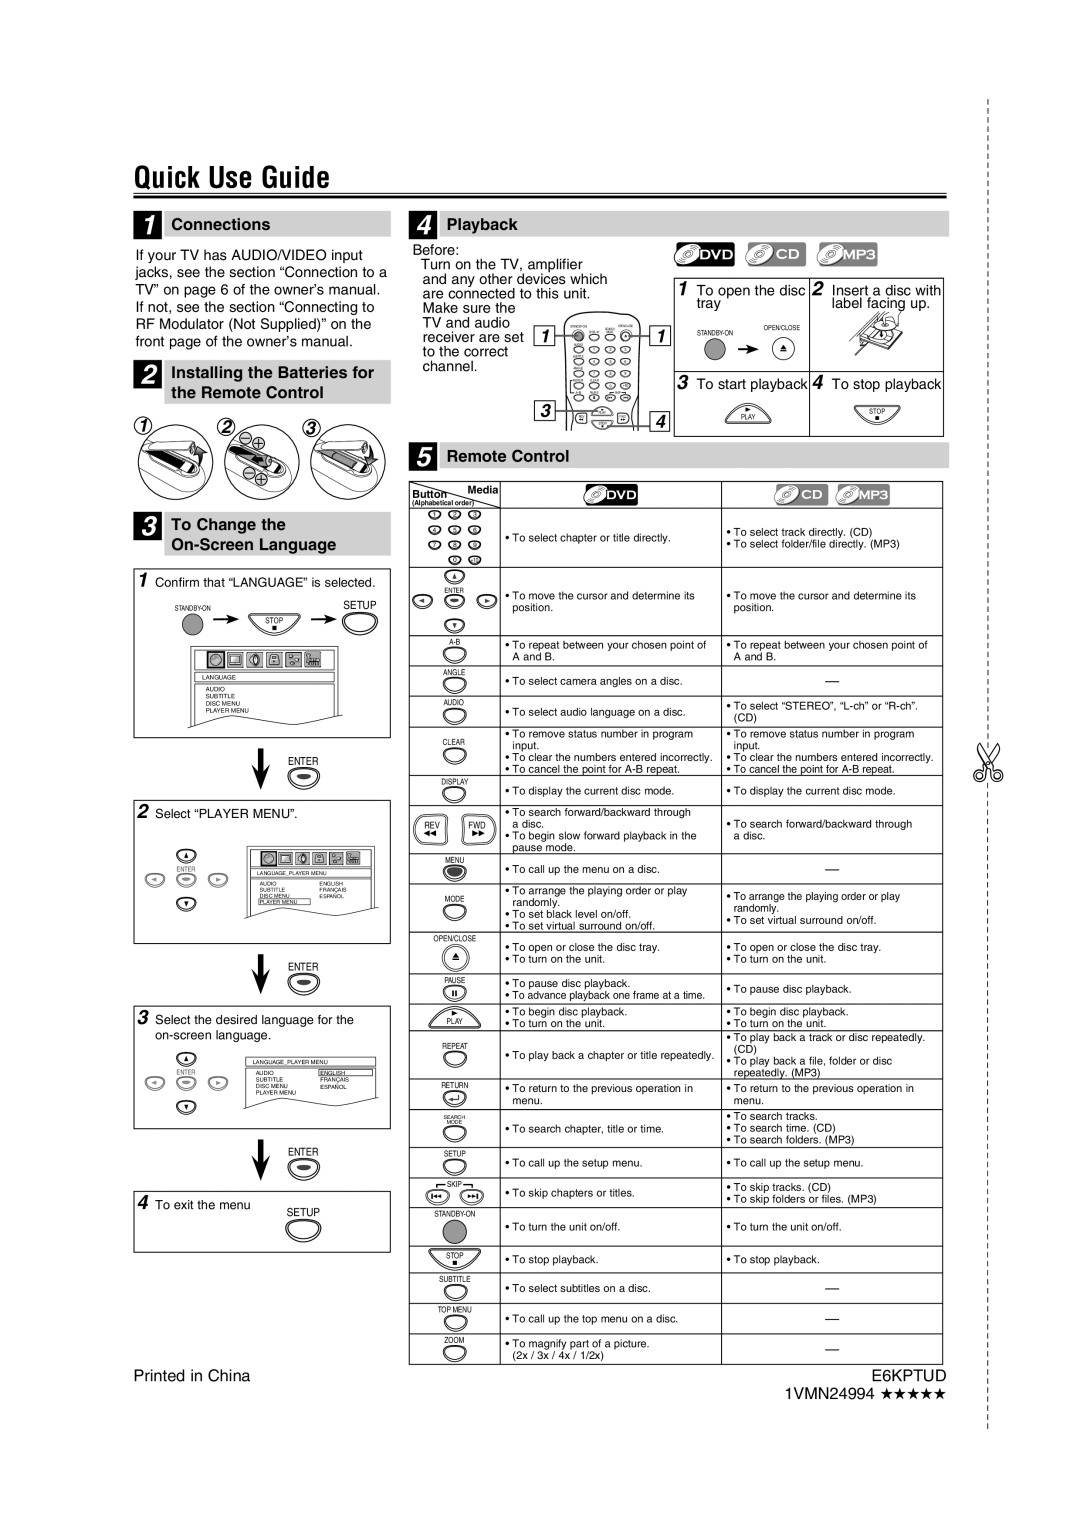 FUNAI DP100HH8A owner manual Quick Use Guide, Connections, Playback, Installing the Batteries for the Remote Control 